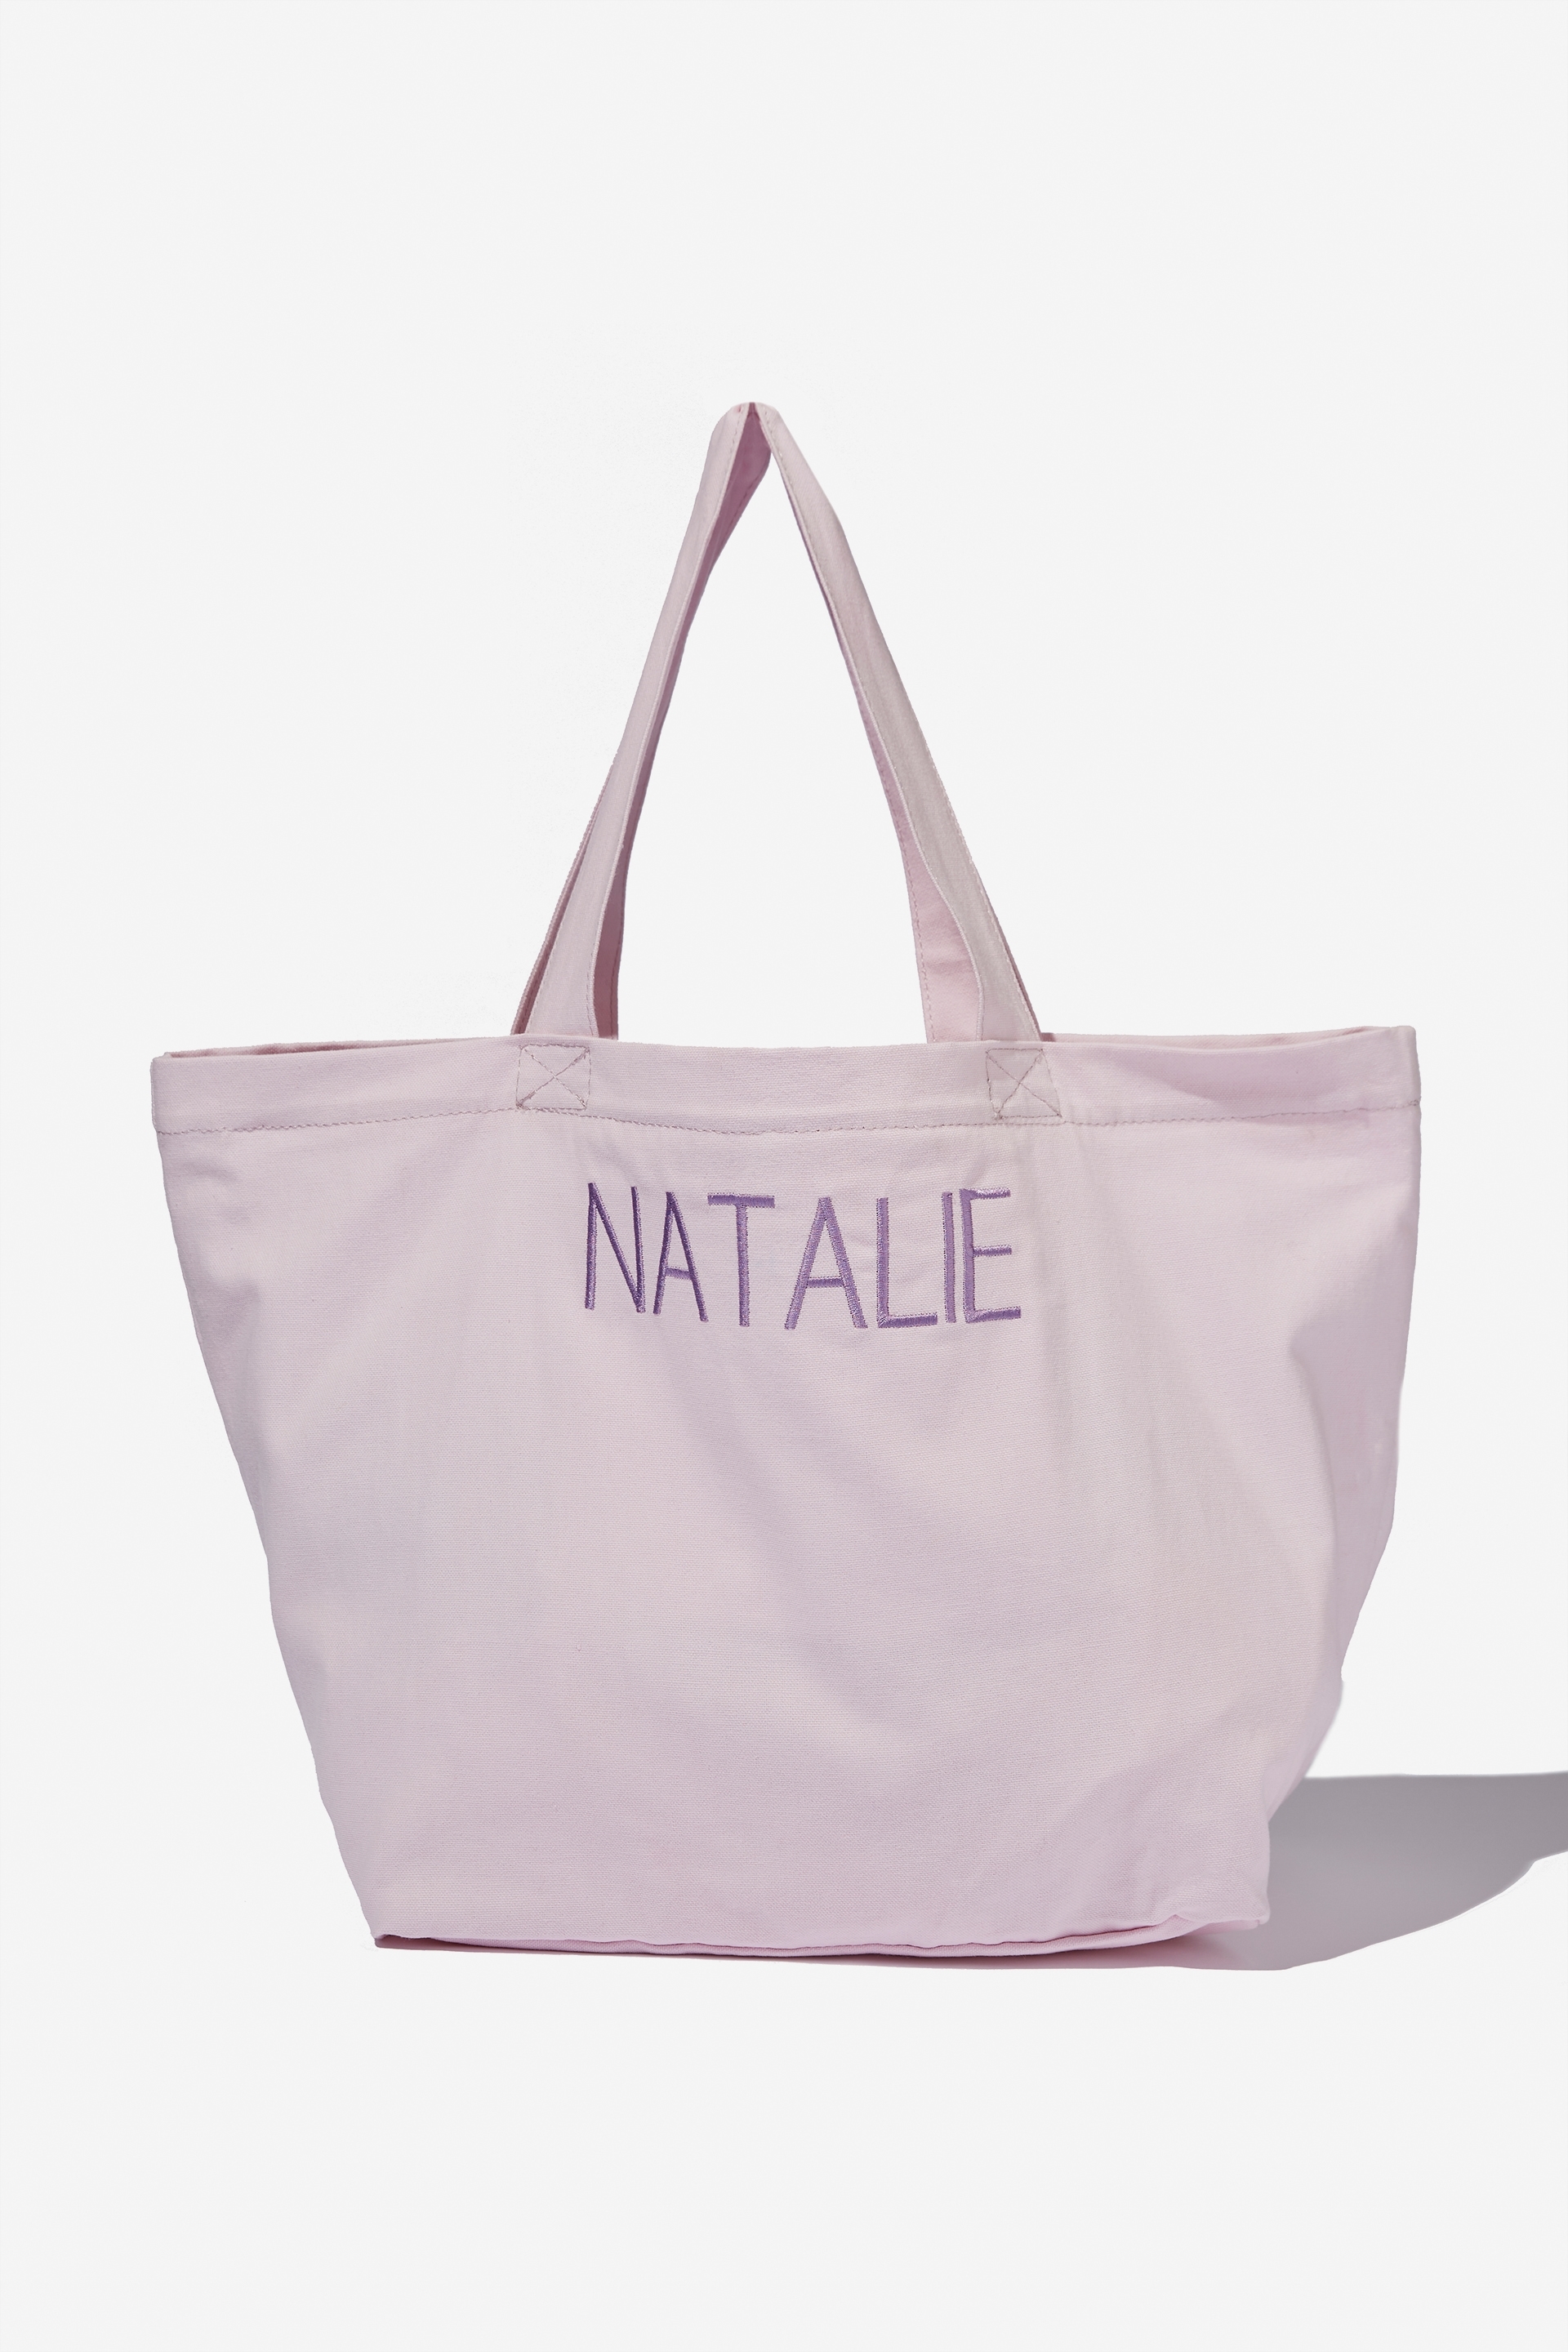 Rubi - Personalised Everyday Canvas Tote - Lilac solid